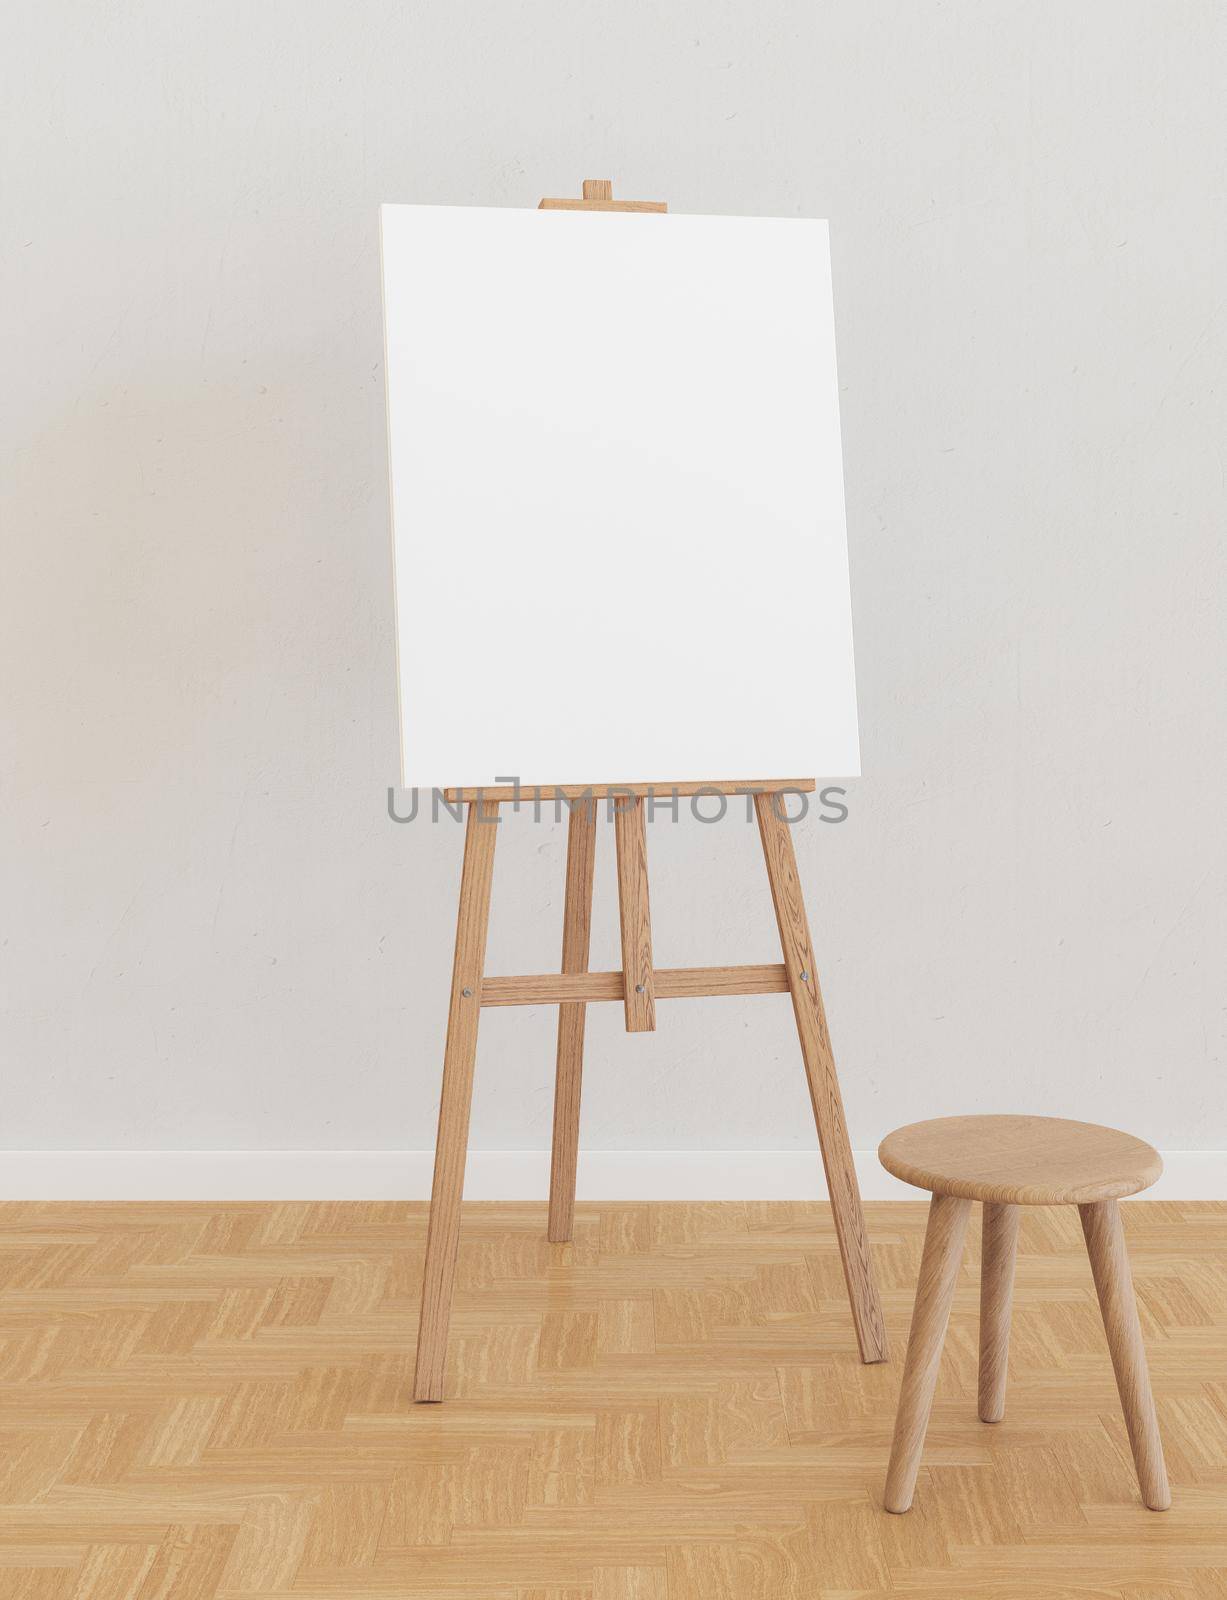 wooden easel with a blank canvas and a stool in front of it in a bright room with soft shadows and parquet floor. 3d render